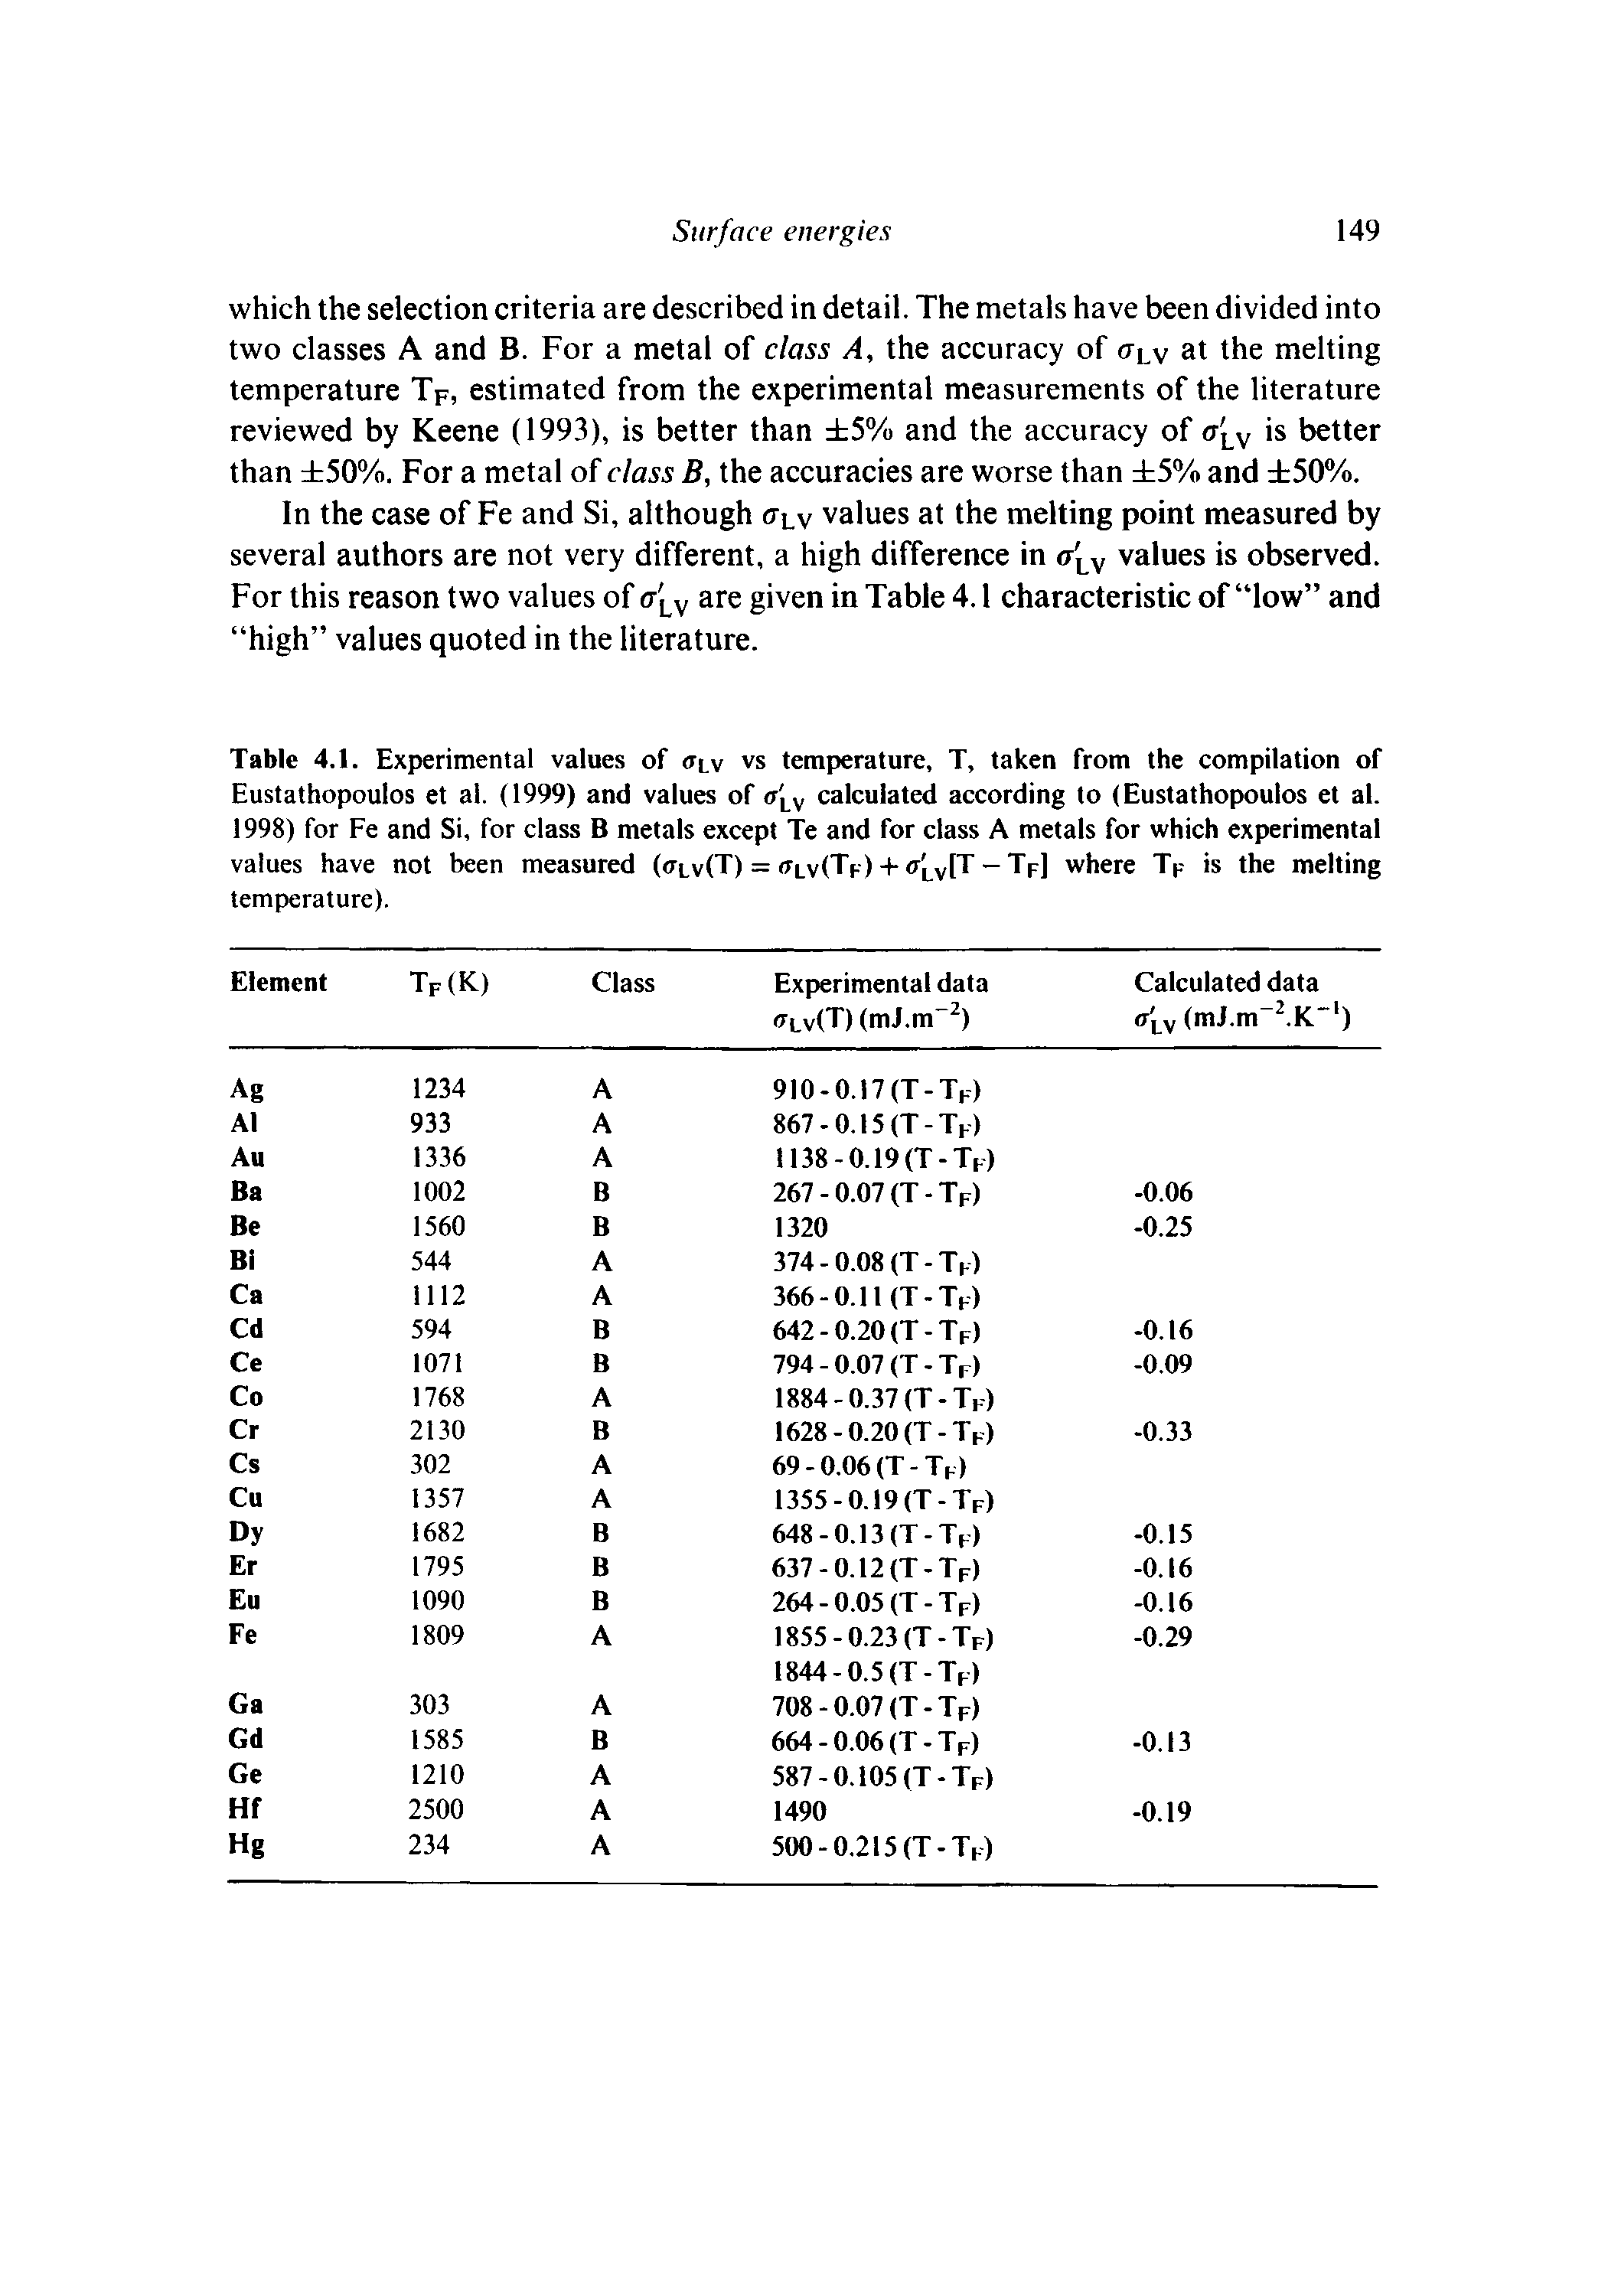 Table 4.1. Experimental values of <tlv vs temperature, T, taken from the compilation of Eustathopoulos et al. (1999) and values of cr LV calculated according to (Eustathopoulos et al. 1998) for Fe and Si, for class B metals except Te and for class A metals for which experimental values have not been measured (<tlv(T) = <T v(Tf) + <t lv[T — Tp] where Tp is the melting temperature).